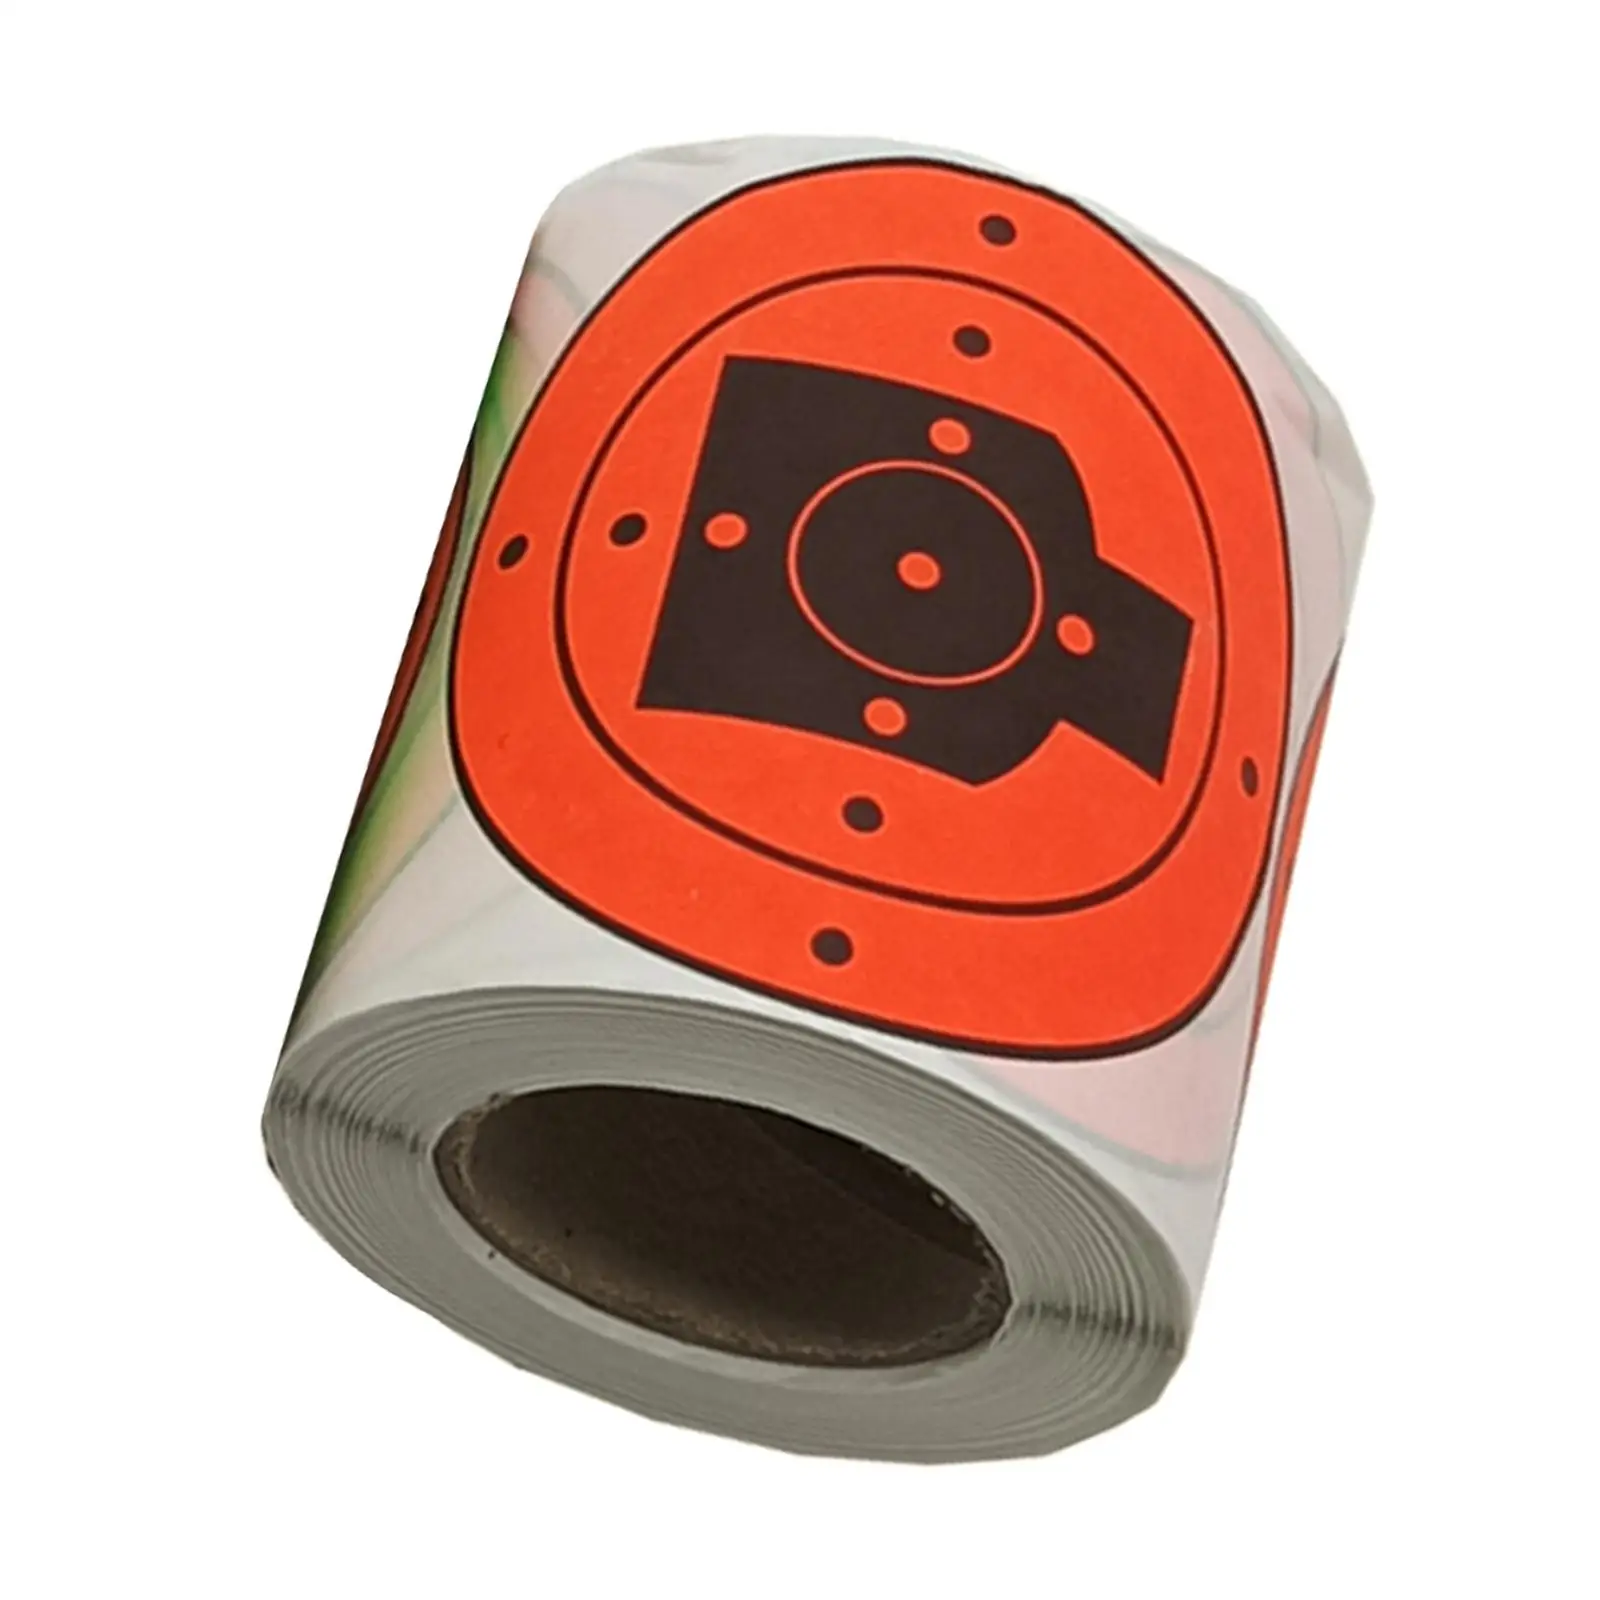 200Pcs Shooting Targets 3`` Adhesive Stickers Fluorescence Paper Targets High Visibility Hunting Targets Accessories